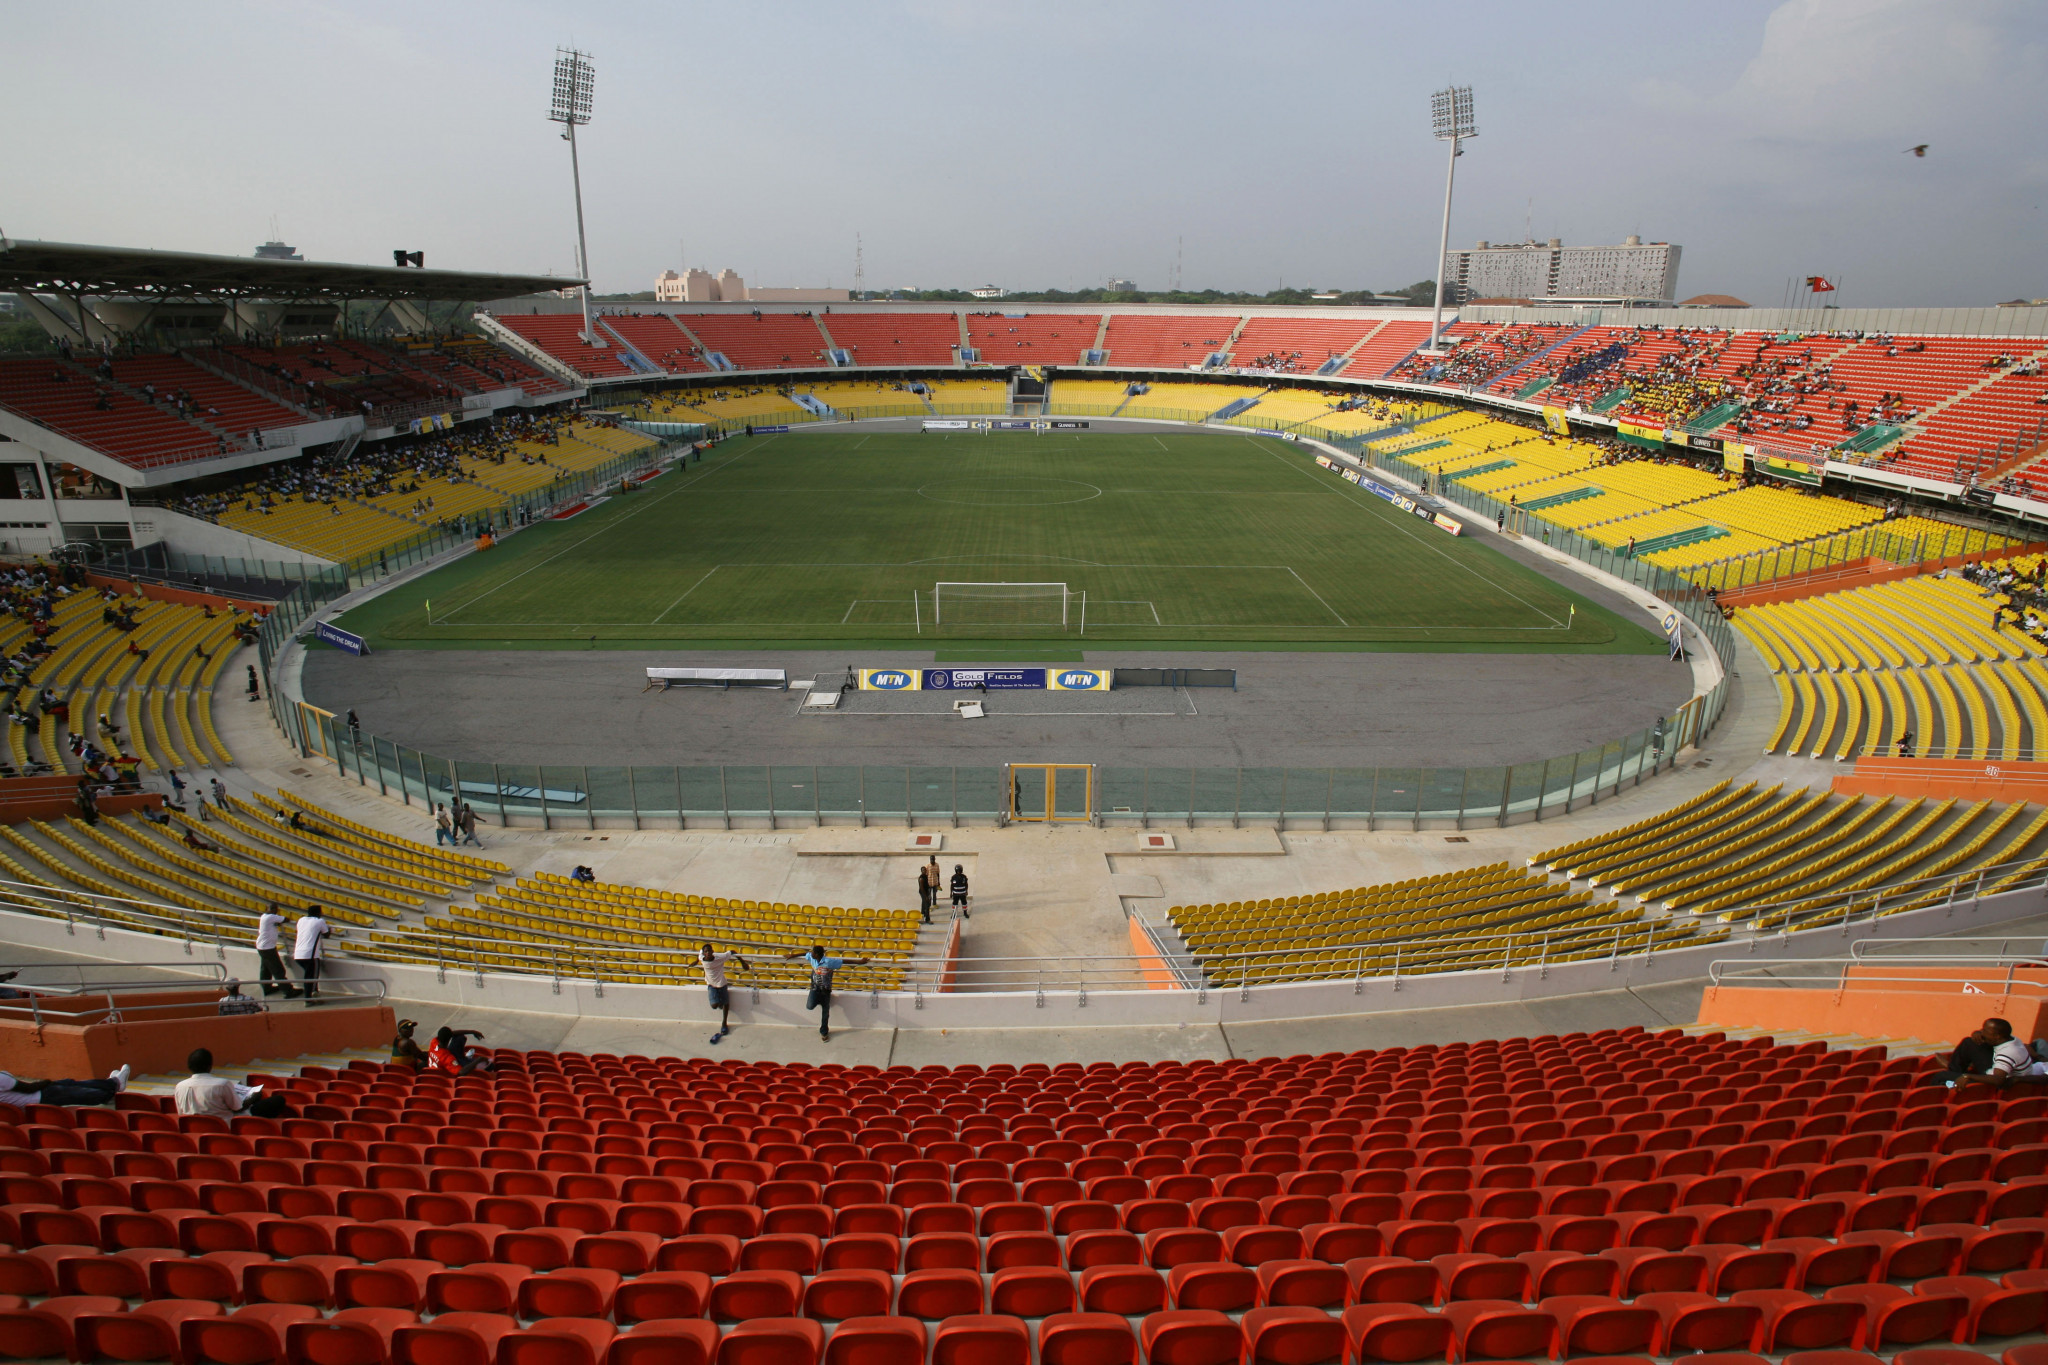 The Ghana Olympic Committee is preparing for the re-arranged 2023 African Games due to take place next year, with the Accra Sports Stadium set to stage the Opening and Closing Ceremonies ©Getty Images